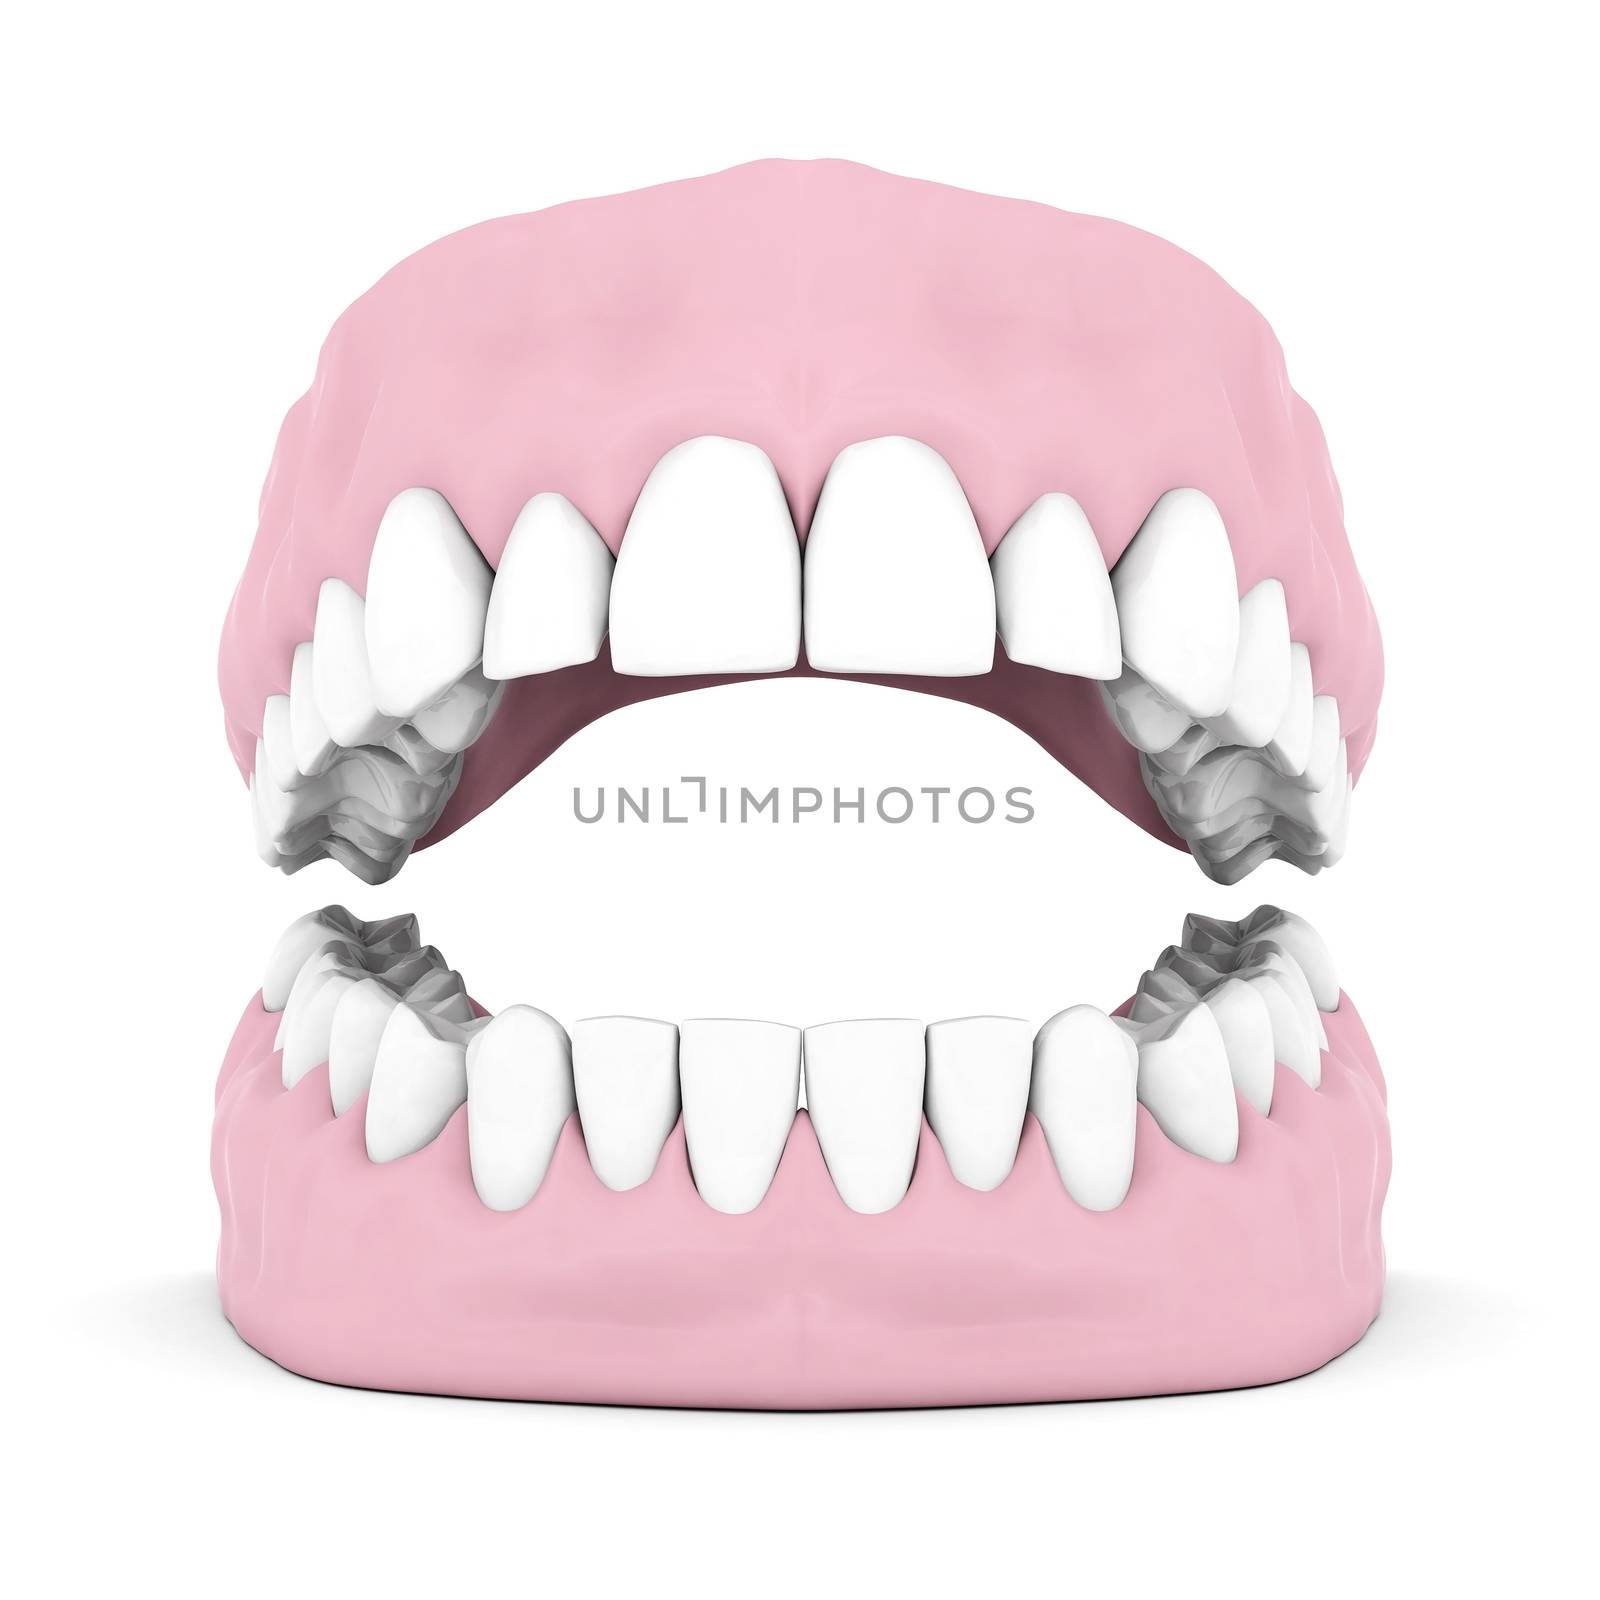 Dentures isolated on a white background